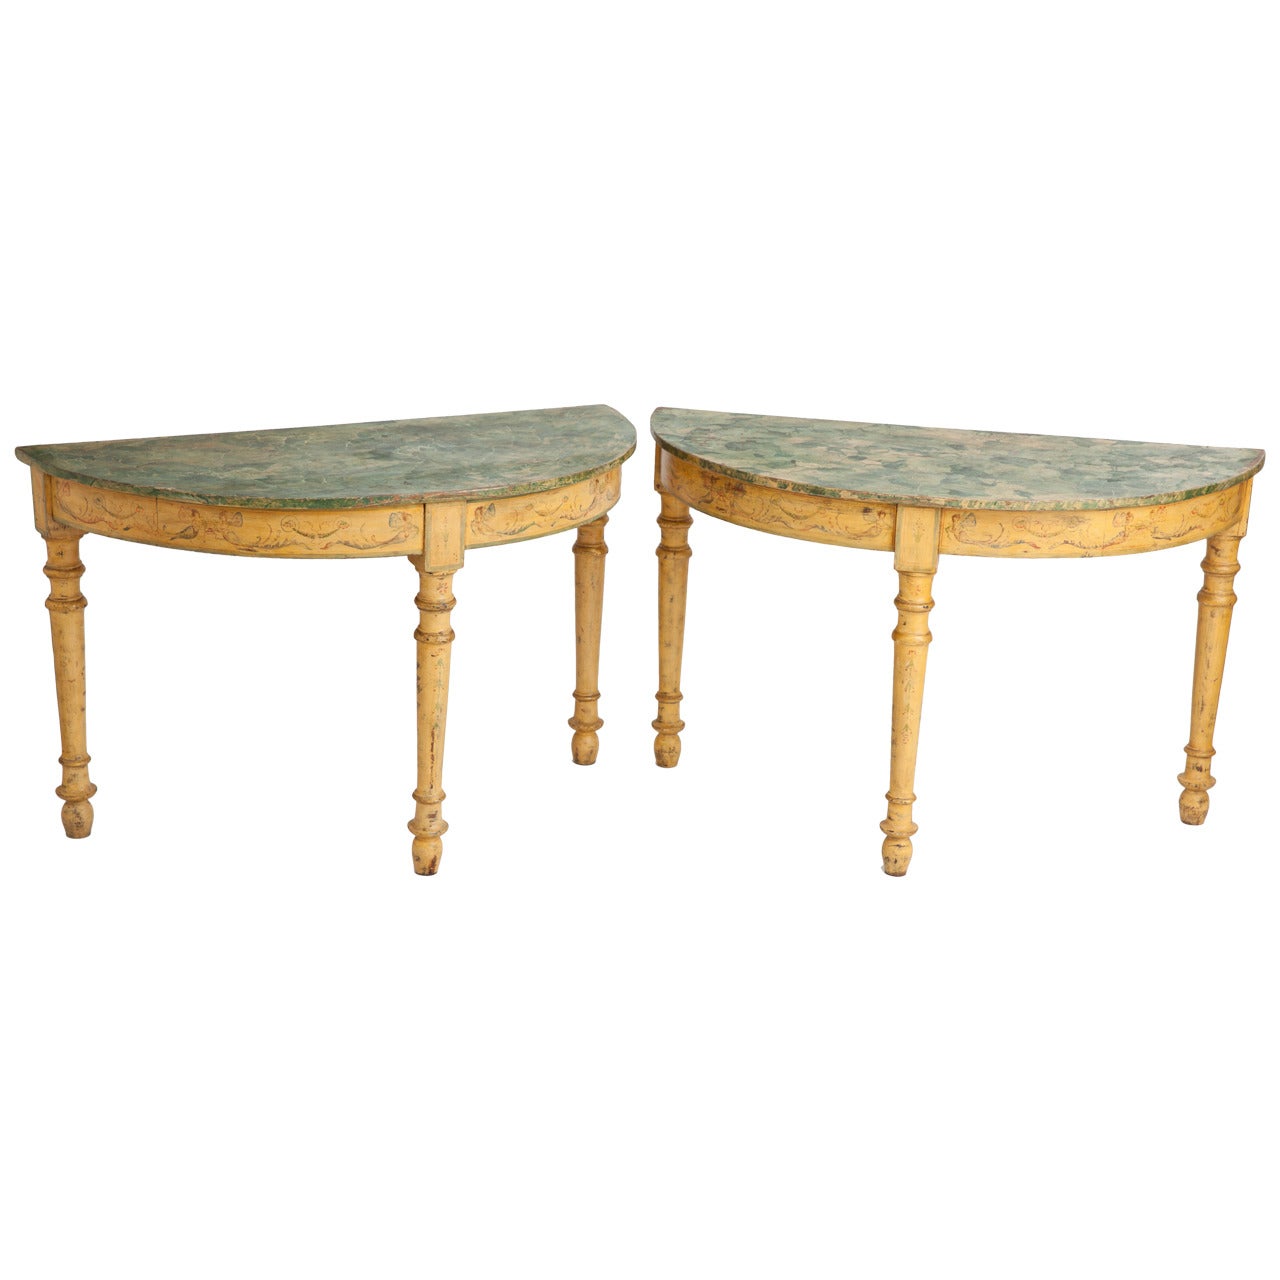 Pair of Painted Italian Demilune with Green Faux Marble Tops, circa 1800